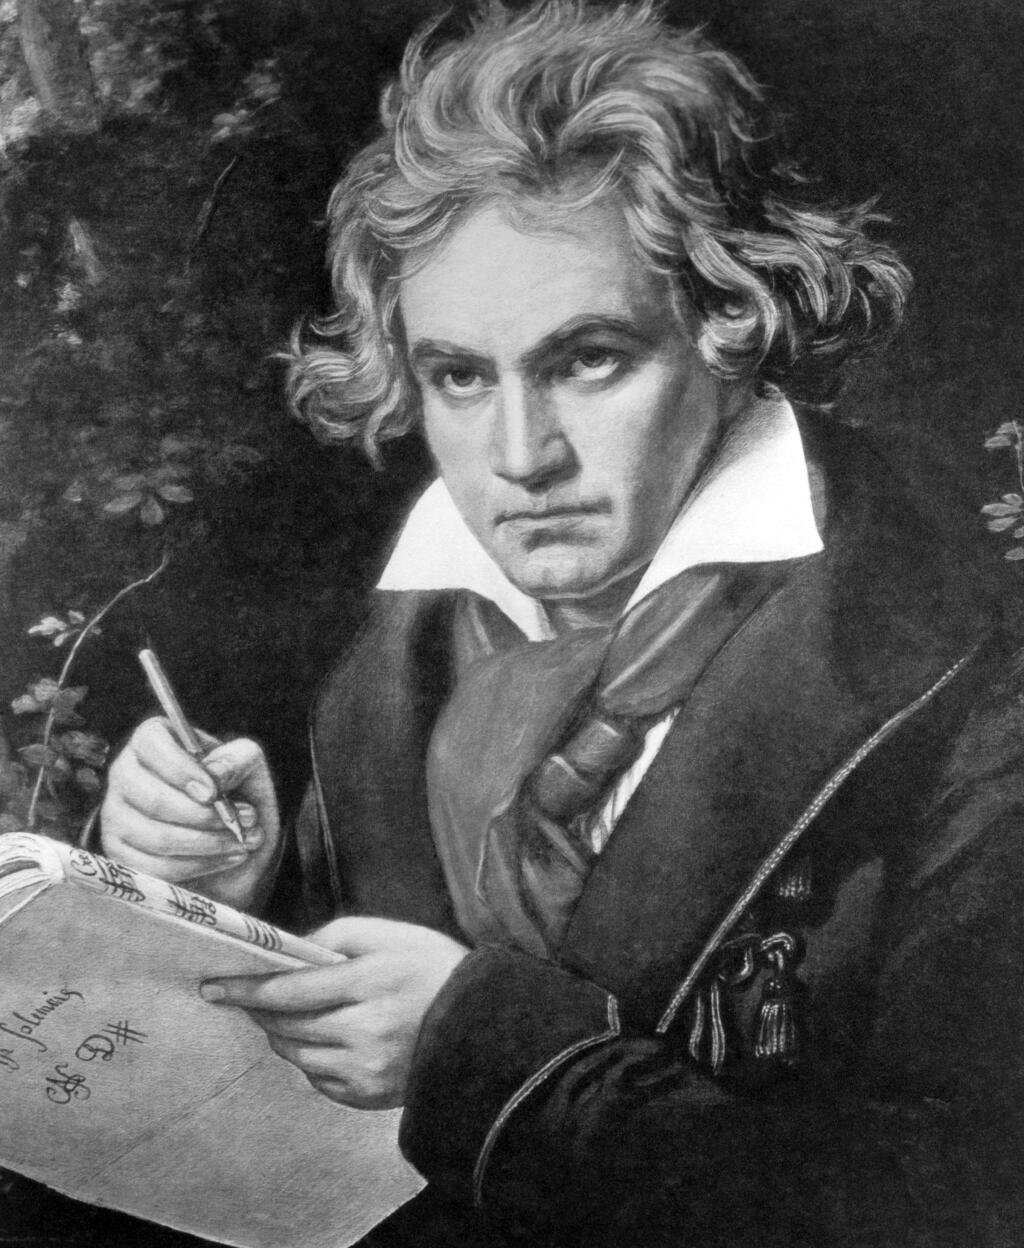 THE GREAT BEETHOVEN: 'He has never stopped being performed,' says pianist Will Johnson of his own favorite composer.